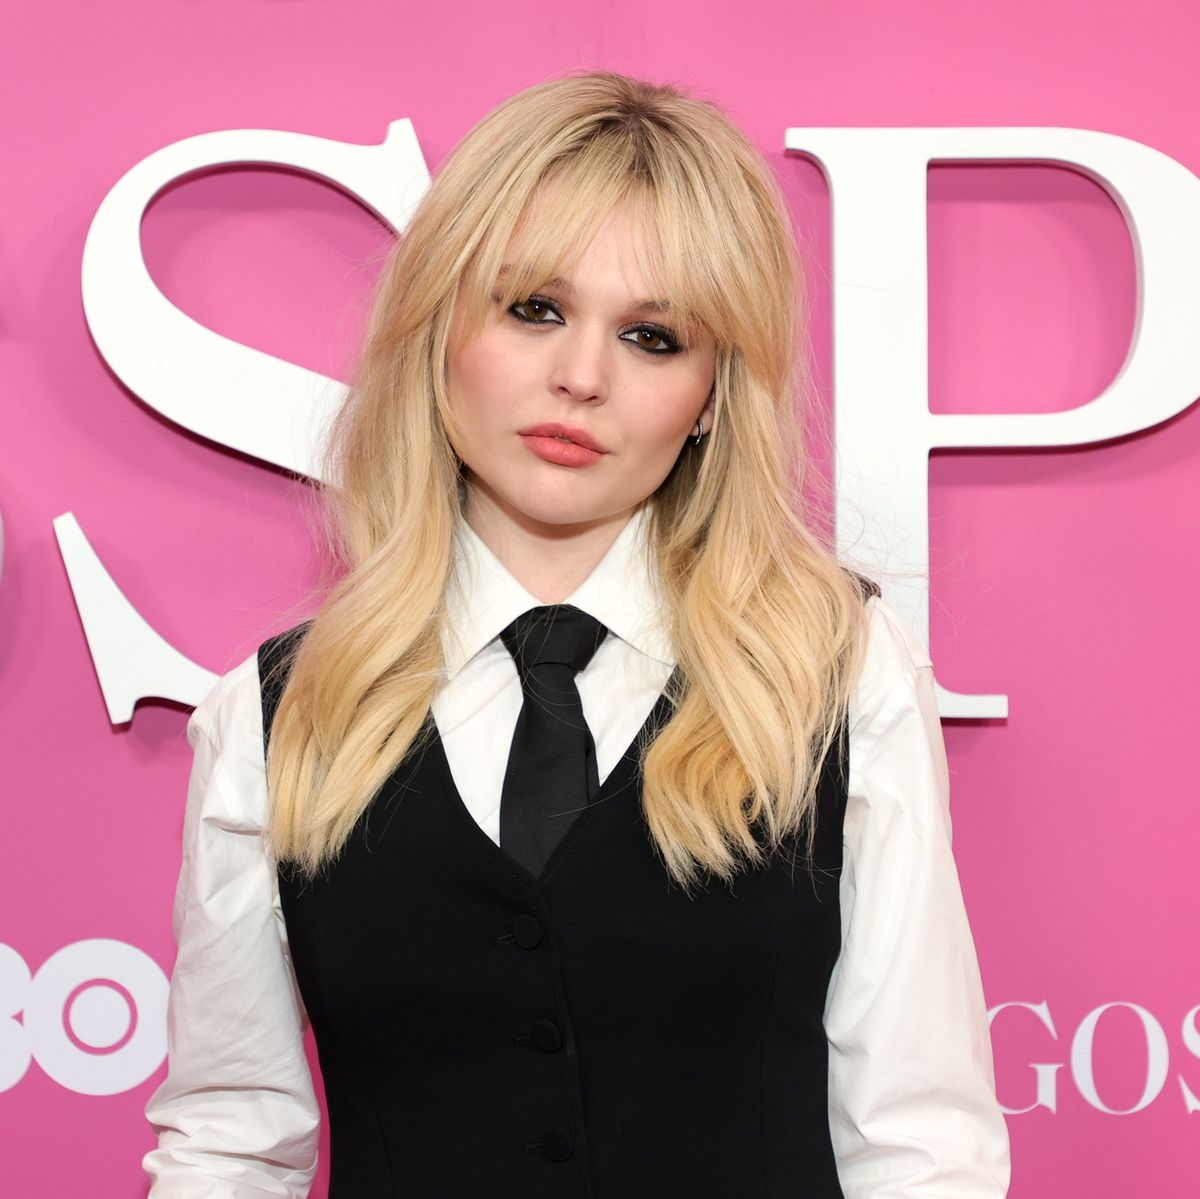 Who is Emily Alyn Lind? - Meet One of the Stars of 'Gossip Girl' on HBO Max